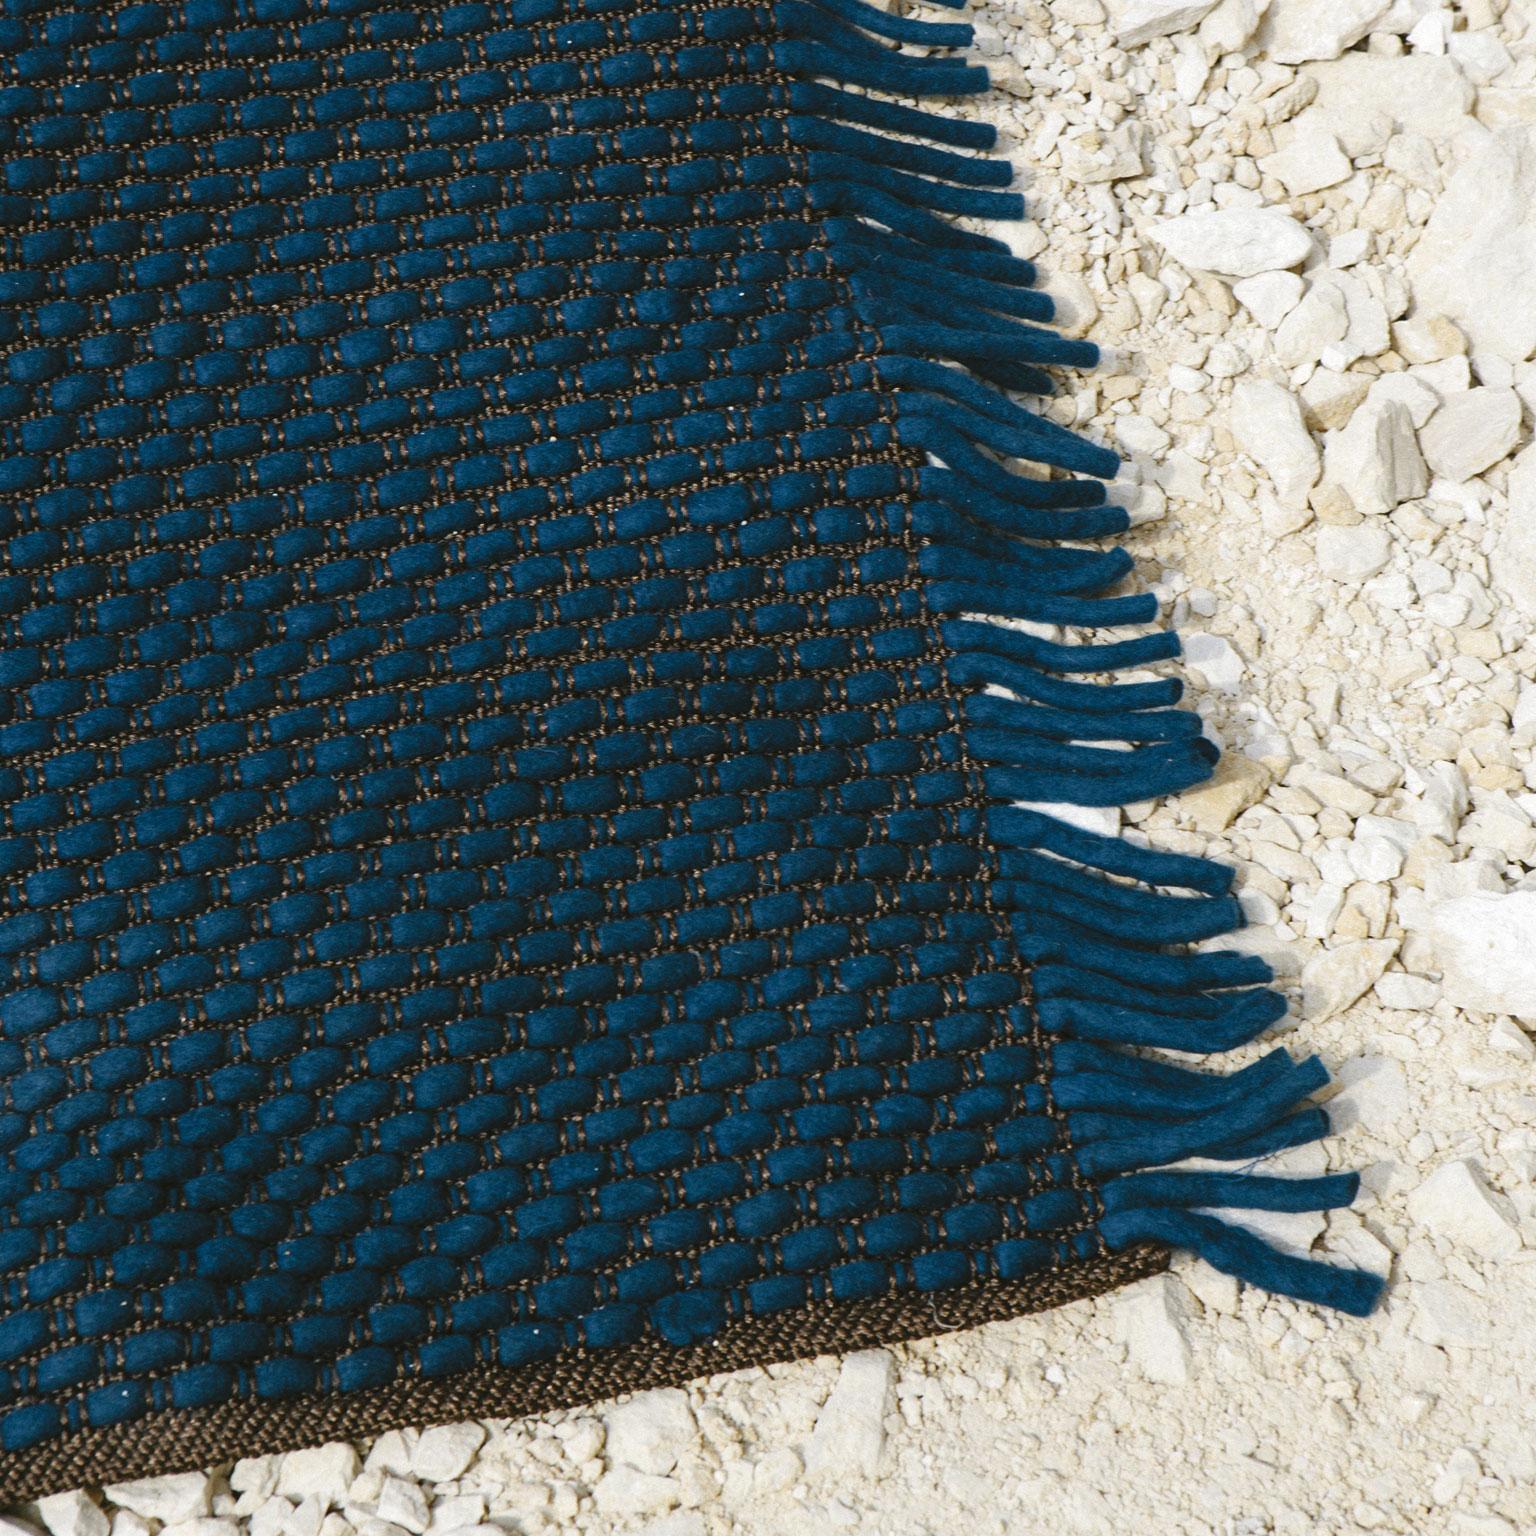 Handwoven rug made in polyester and felt. The felt cords appear and disappear from the polyester warp and find their identity in the straight, compact fringes on the side.

Standard size: 6.6' x 9.9' (200 x 300 cm)
Also available in 5.6' x 7.9' (